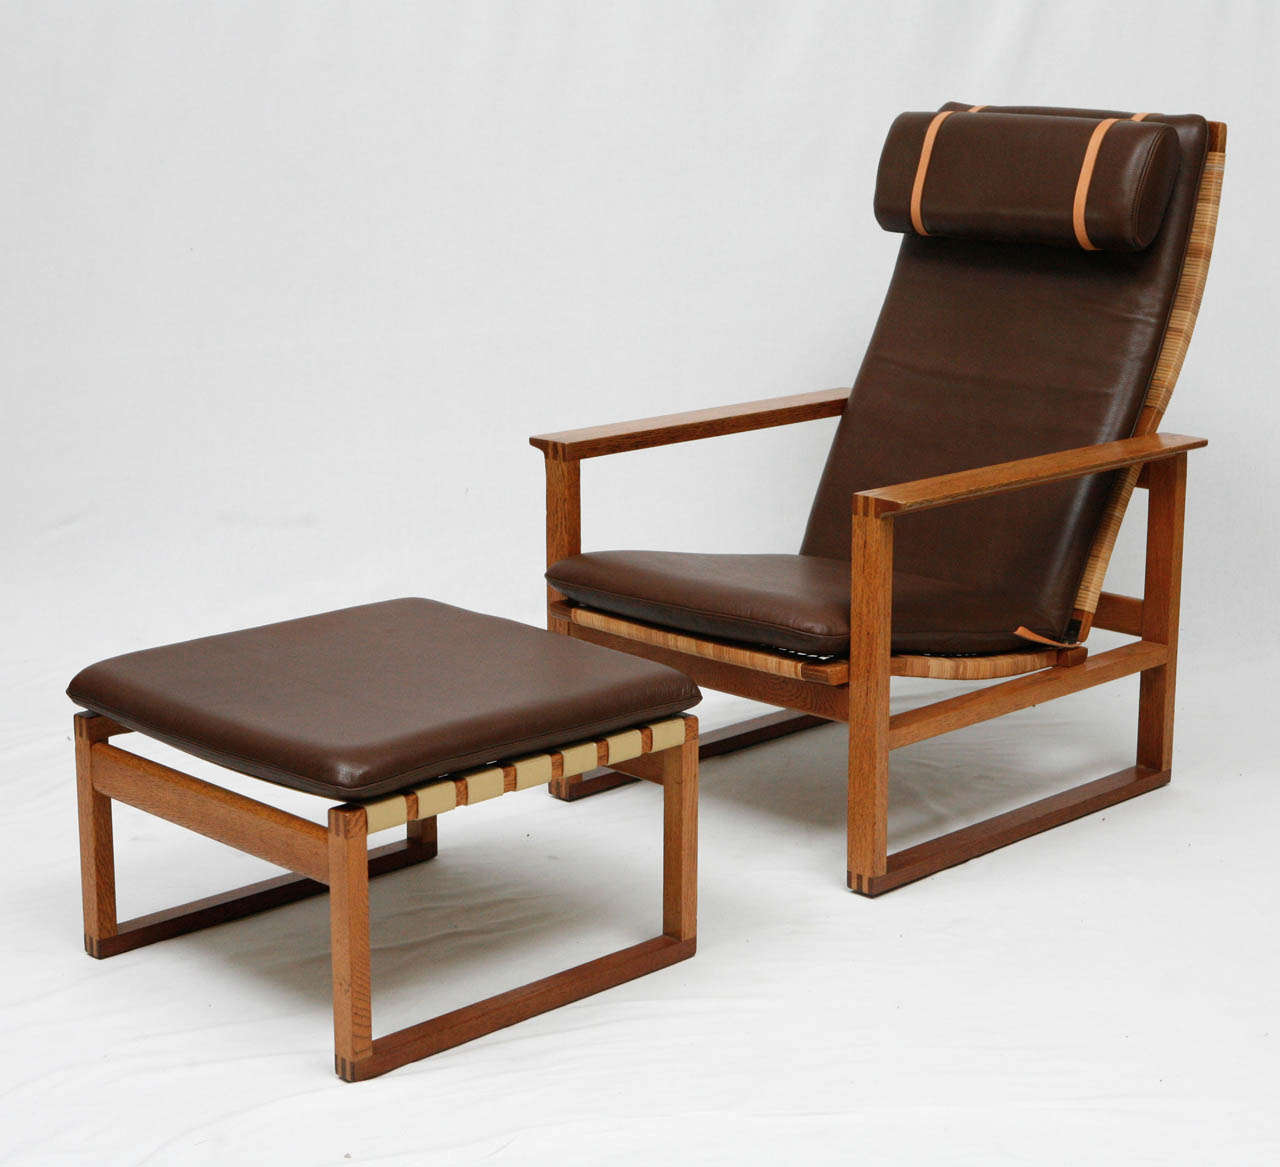 Borge Mogensen lounge chair And ottoman designed in 1957 and produced by Fredericia.